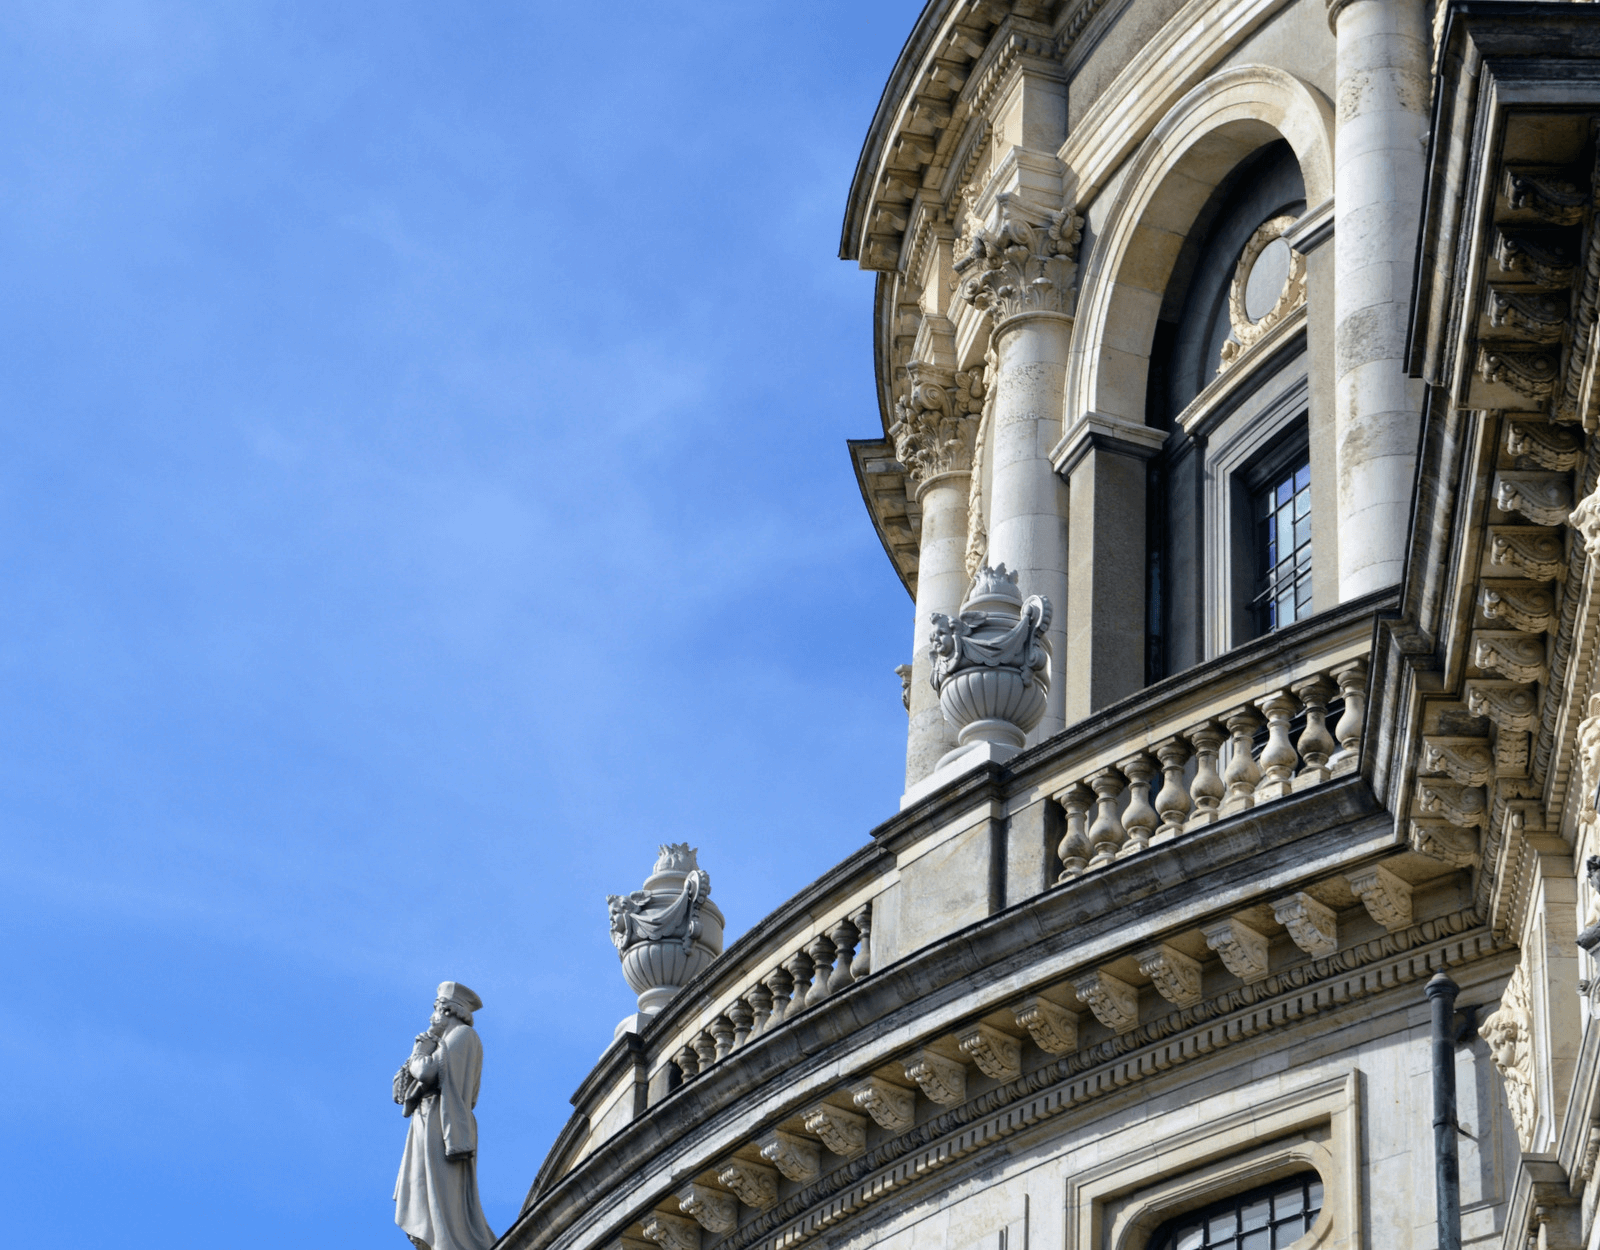 Corbels supporting a balcony overhang